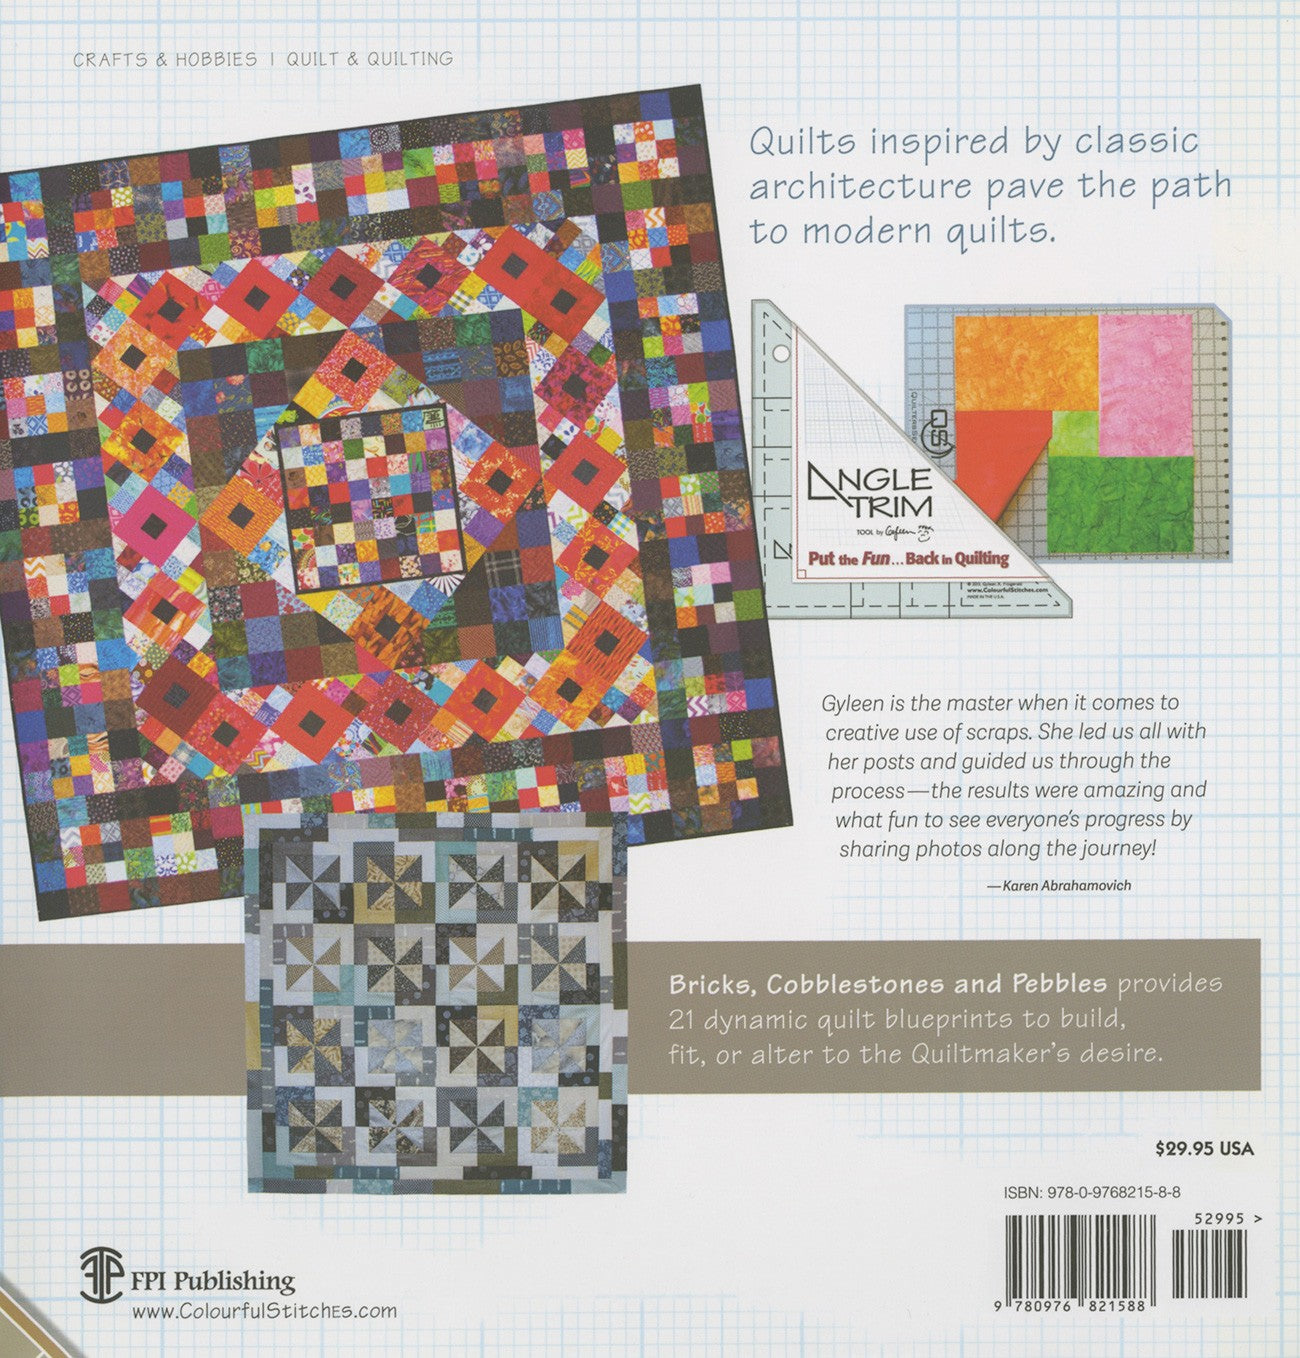 Bricks, Cobblestones and Pebbles Quilt Pattern Book by Gyleen X Fitzgerald of Colourful Stitches - Dings & Dents